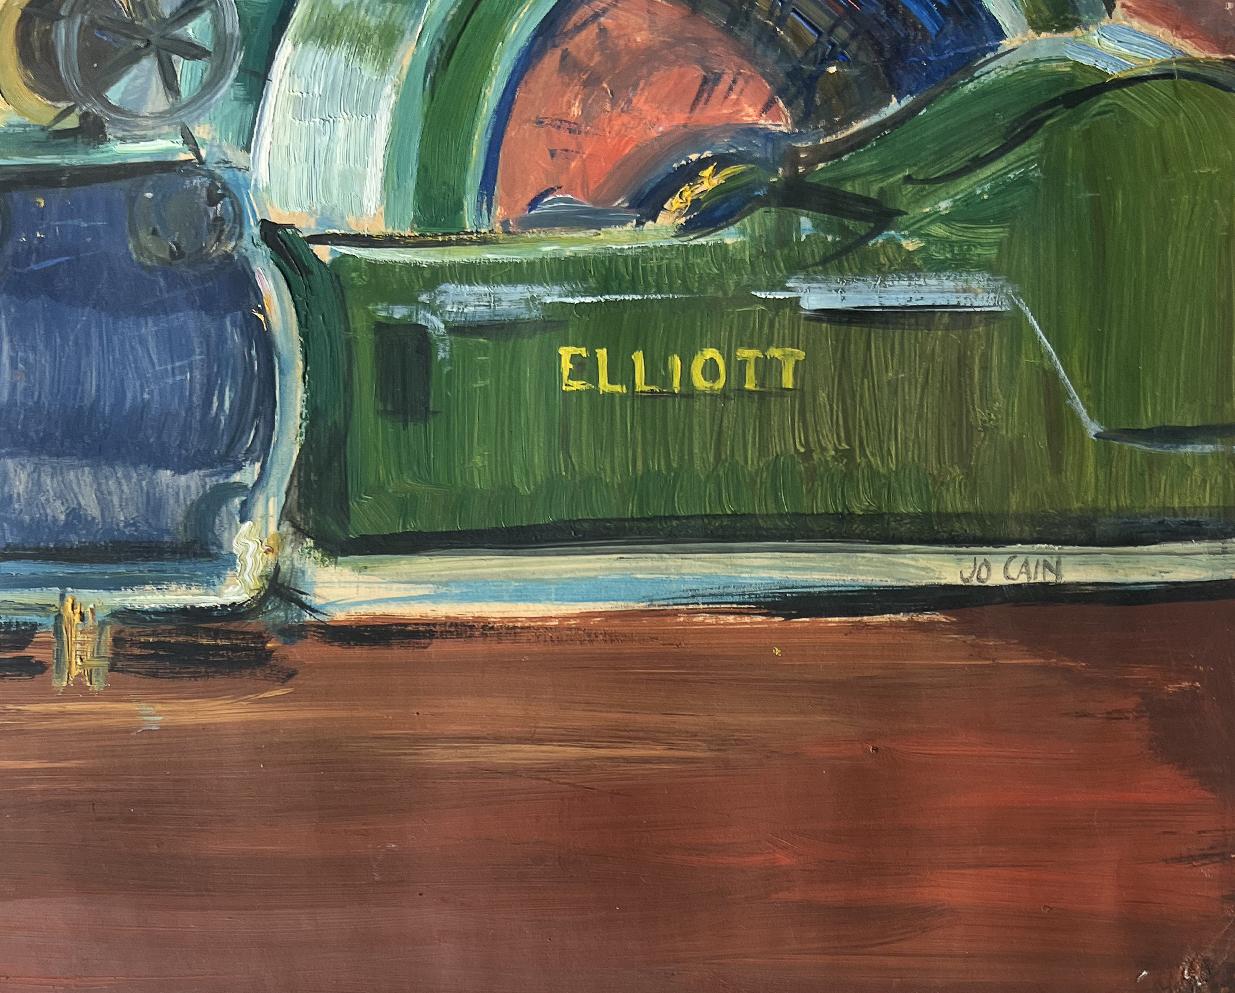 Machine Age Industrial WPA Era American Scene Social Realism Mid 20th Century

Jo Cain (1904 - 2003)
Elliot
17 ¼ x 35 ¾ inches
Gouache on board, c. 1930s
Signed lower left
27 x 46 inches framed

Our gallery is pleased to present the exhibition, 